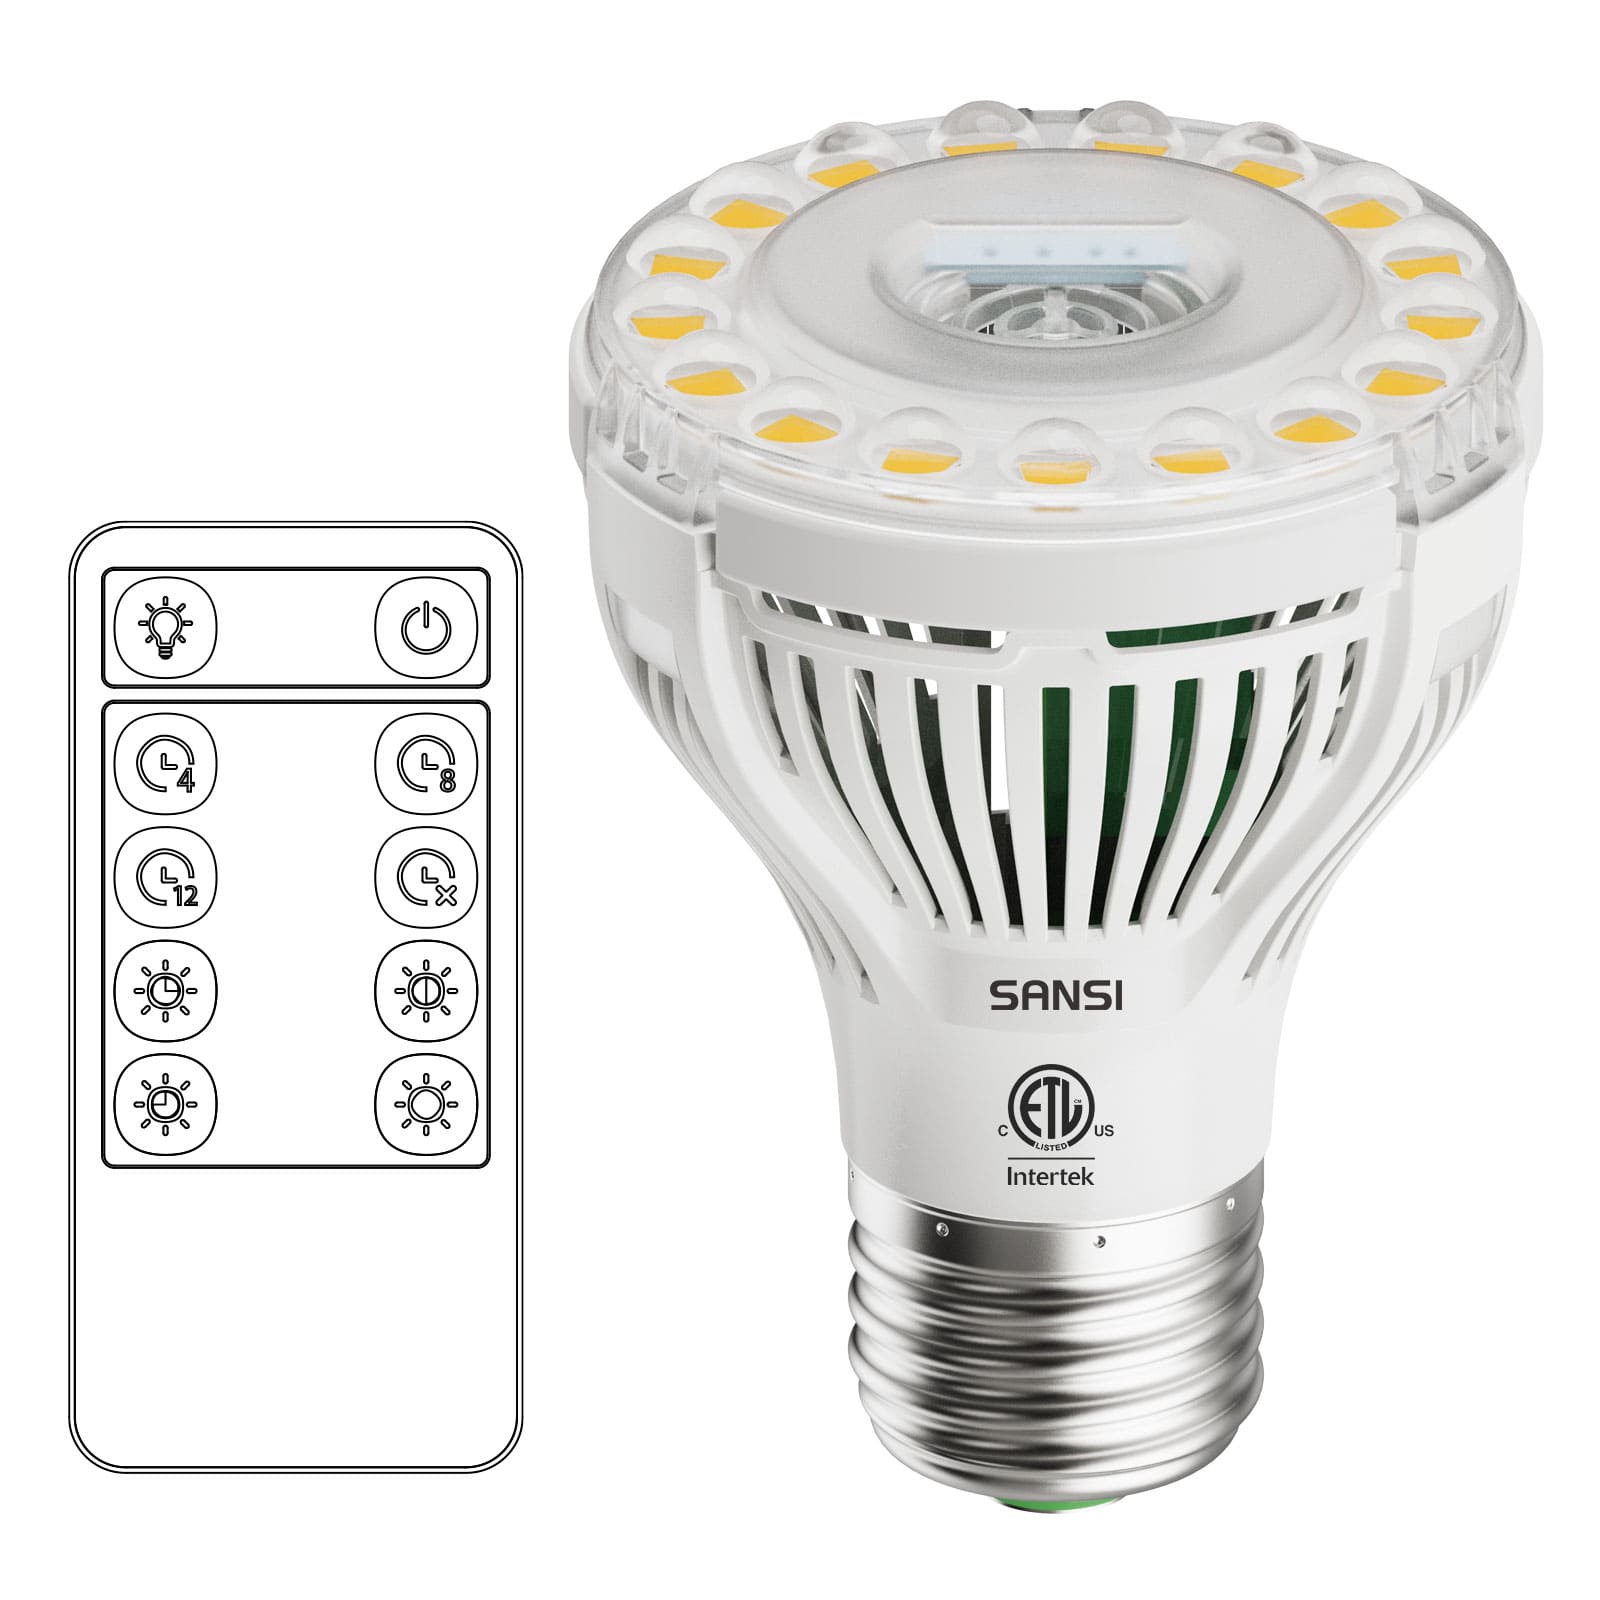 PAR20 5W LED Grow Light Bulb With Remote Control (US ONLY)